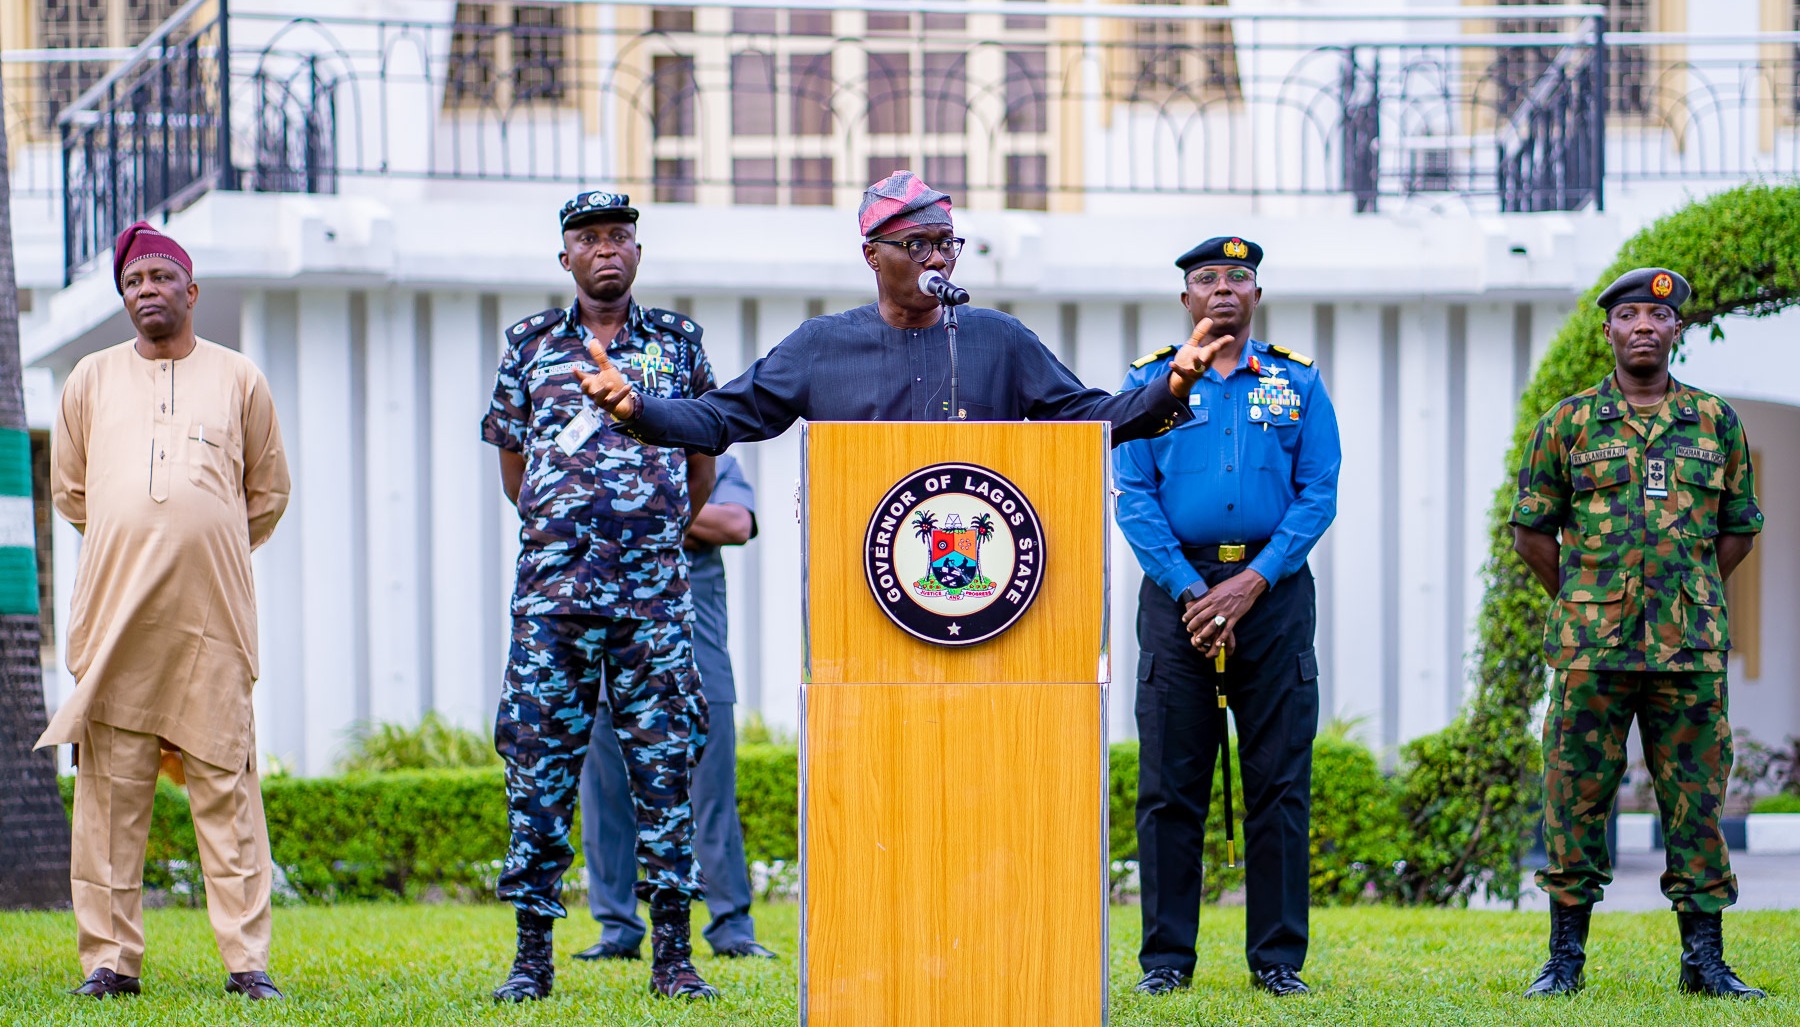 PICTURES: GOV. SANWO-OLU BRIEFS MEDIA AFTER THE STATE SECURITY COUNCIL MEETING AT LAGOS HOUSE, MARINA ON SATURDAY, APRIL 4, 2020